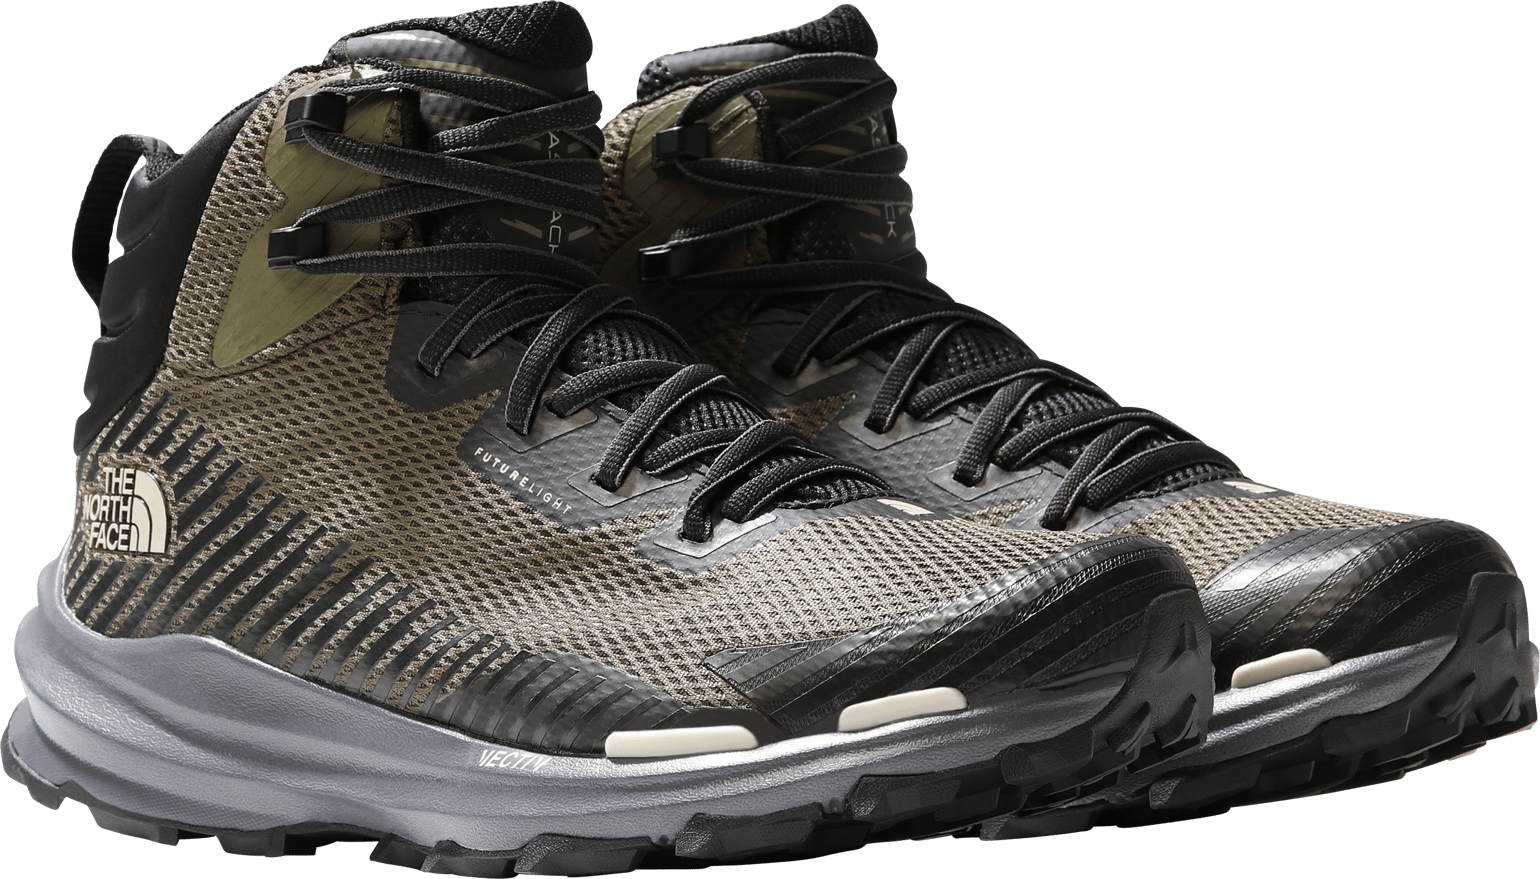 The North Face Men's Vectiv Fastpack FutureLight Mid MILITARY OLIVE/TNF BLACK